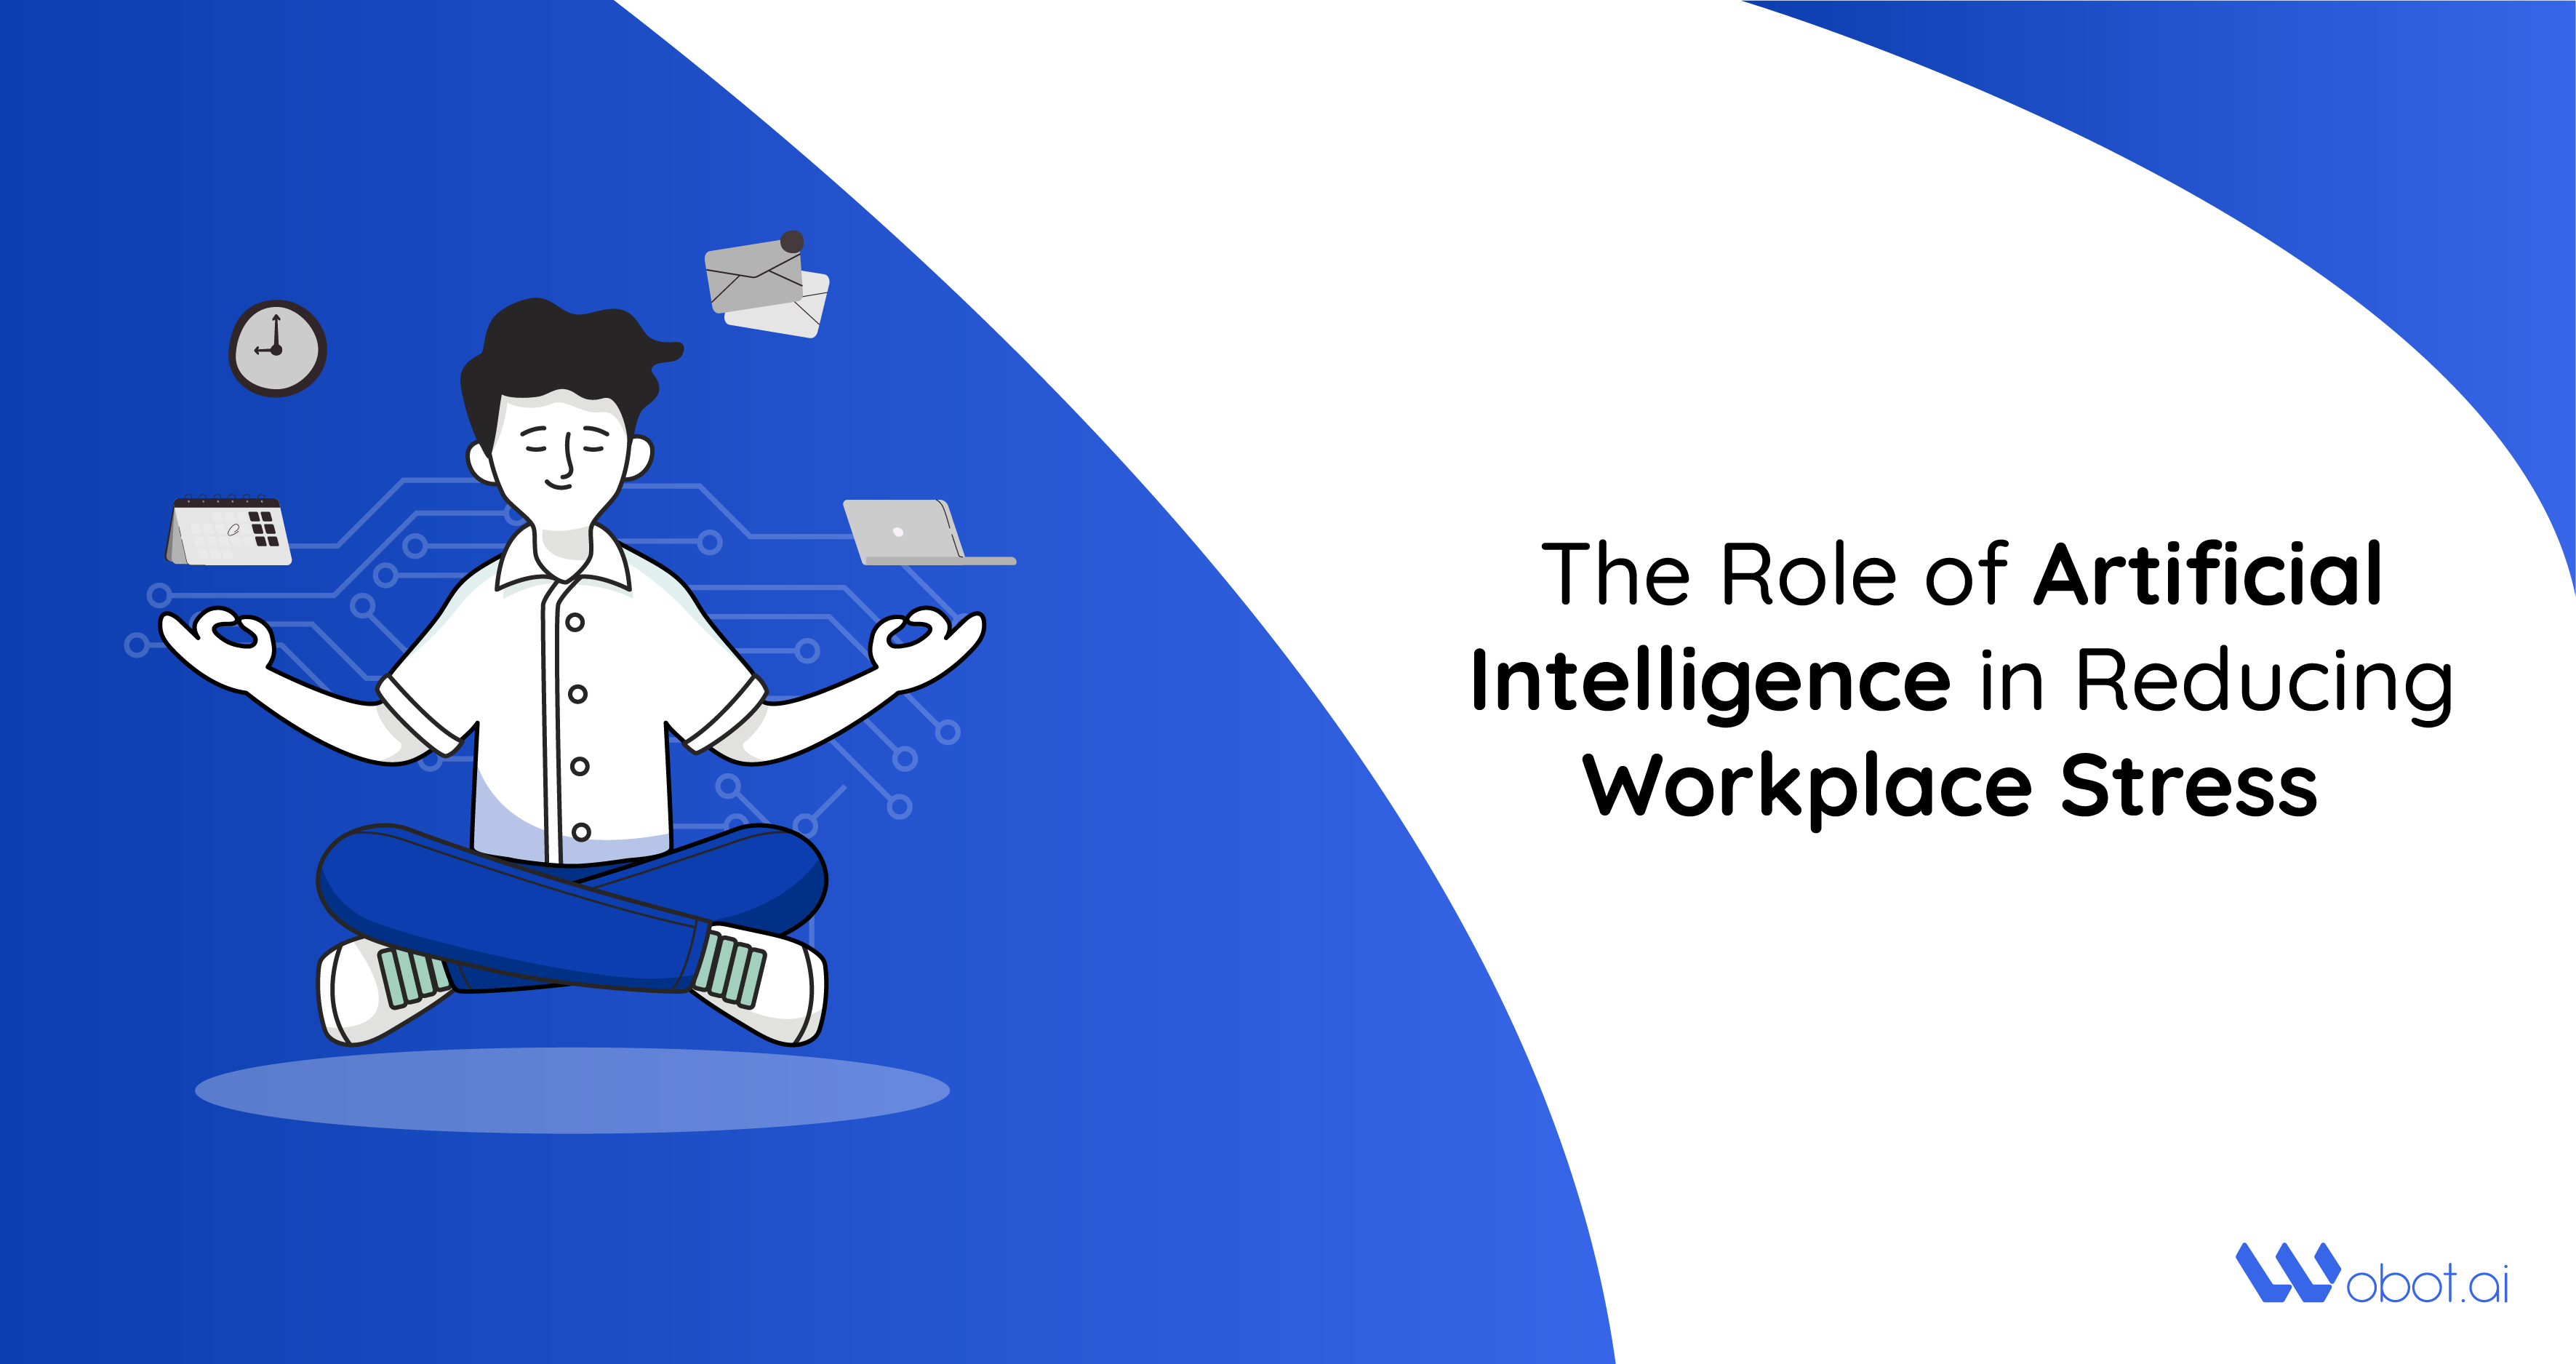 The Role of Artificial Intelligence in Reducing Workplace Stress